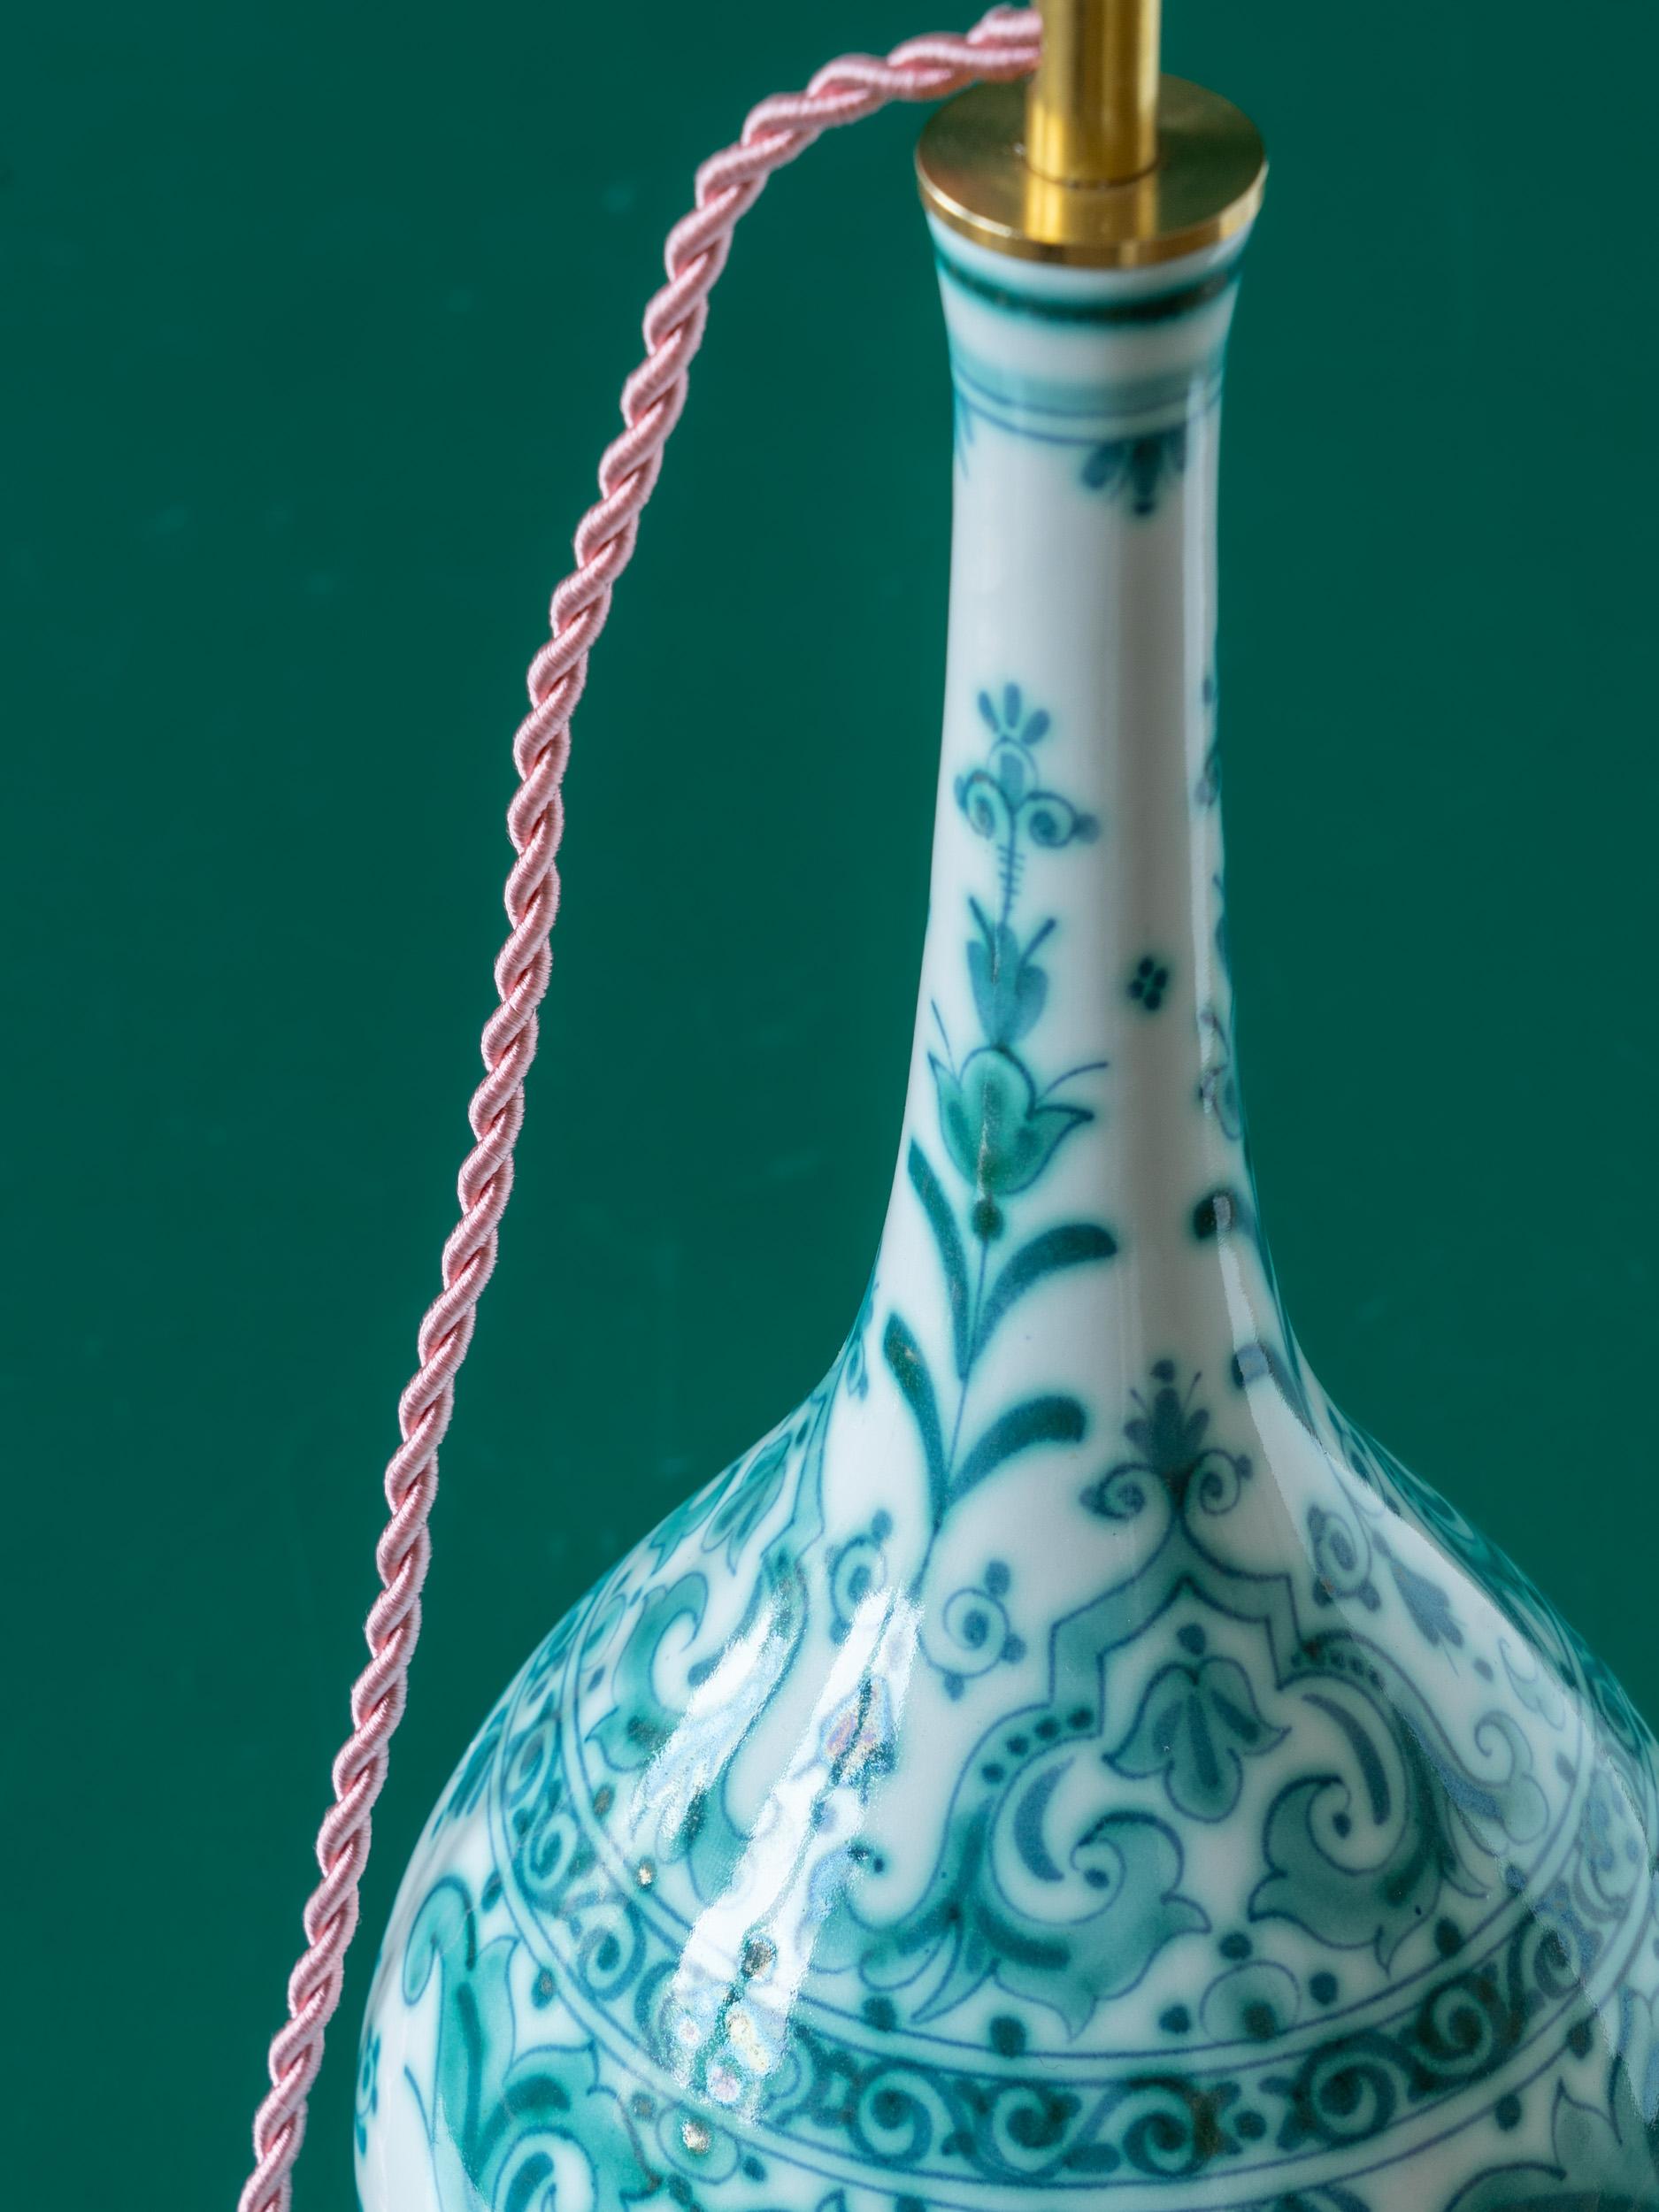 Chinoiserie Royal Delft Delvert Lamp, Liberty London Lampshade, 1968-1976 For Sale